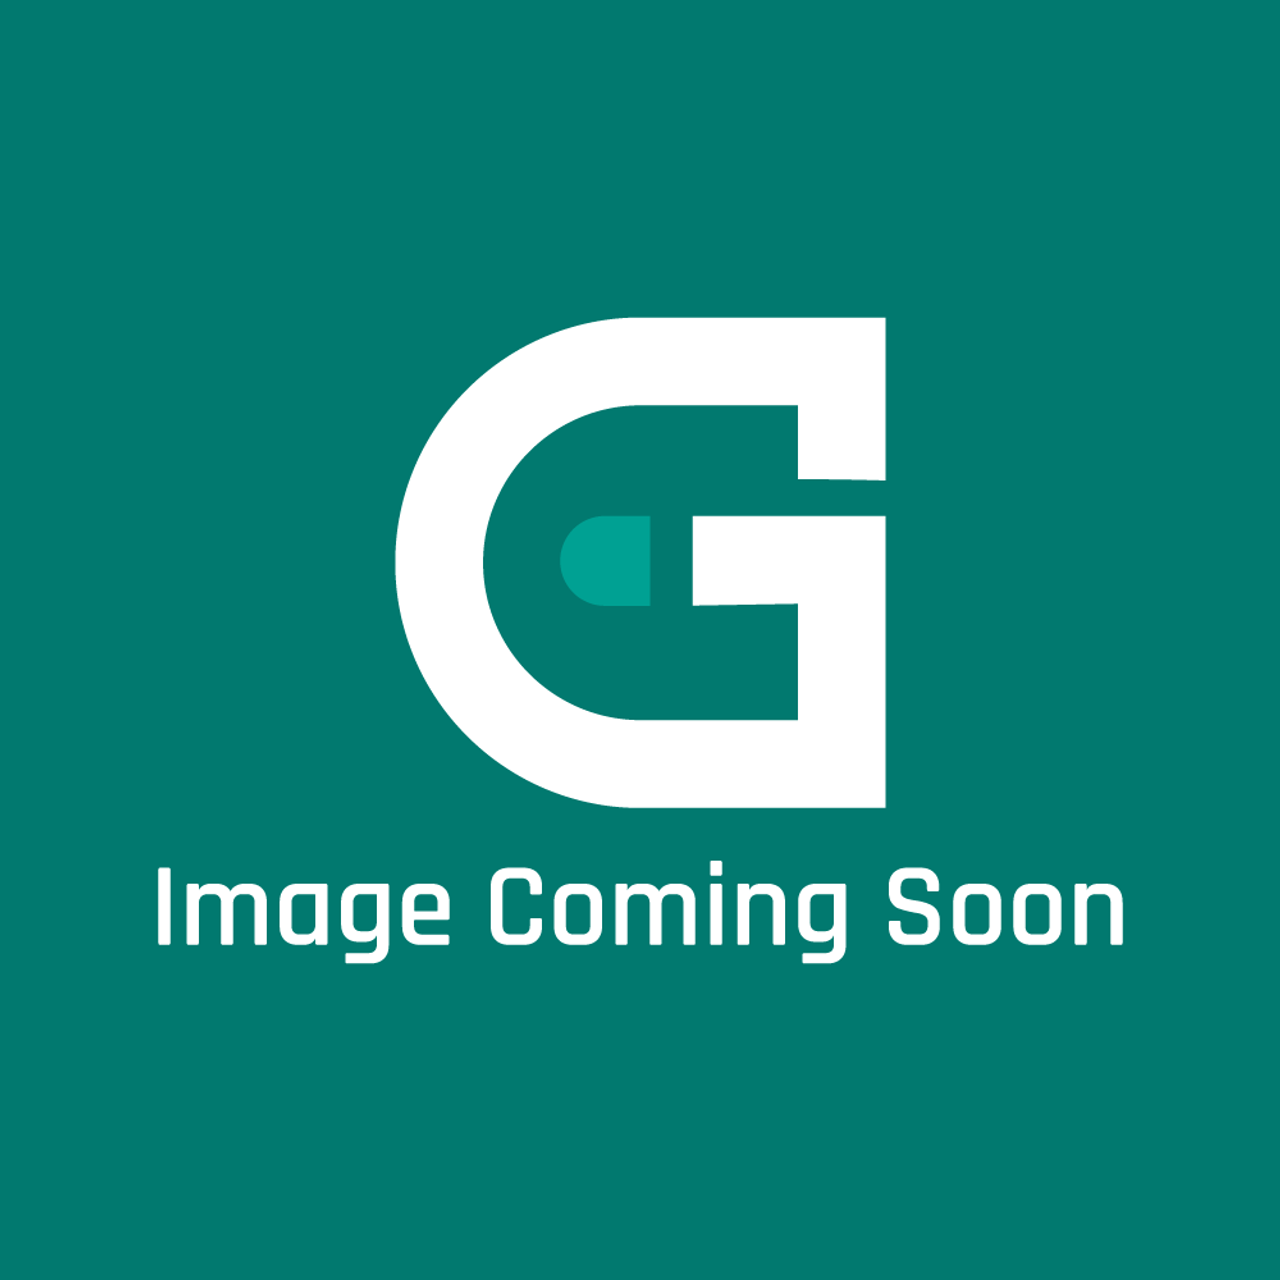 Delfield 271-D2G-0030-S - Guard, Therm - Image Coming Soon!